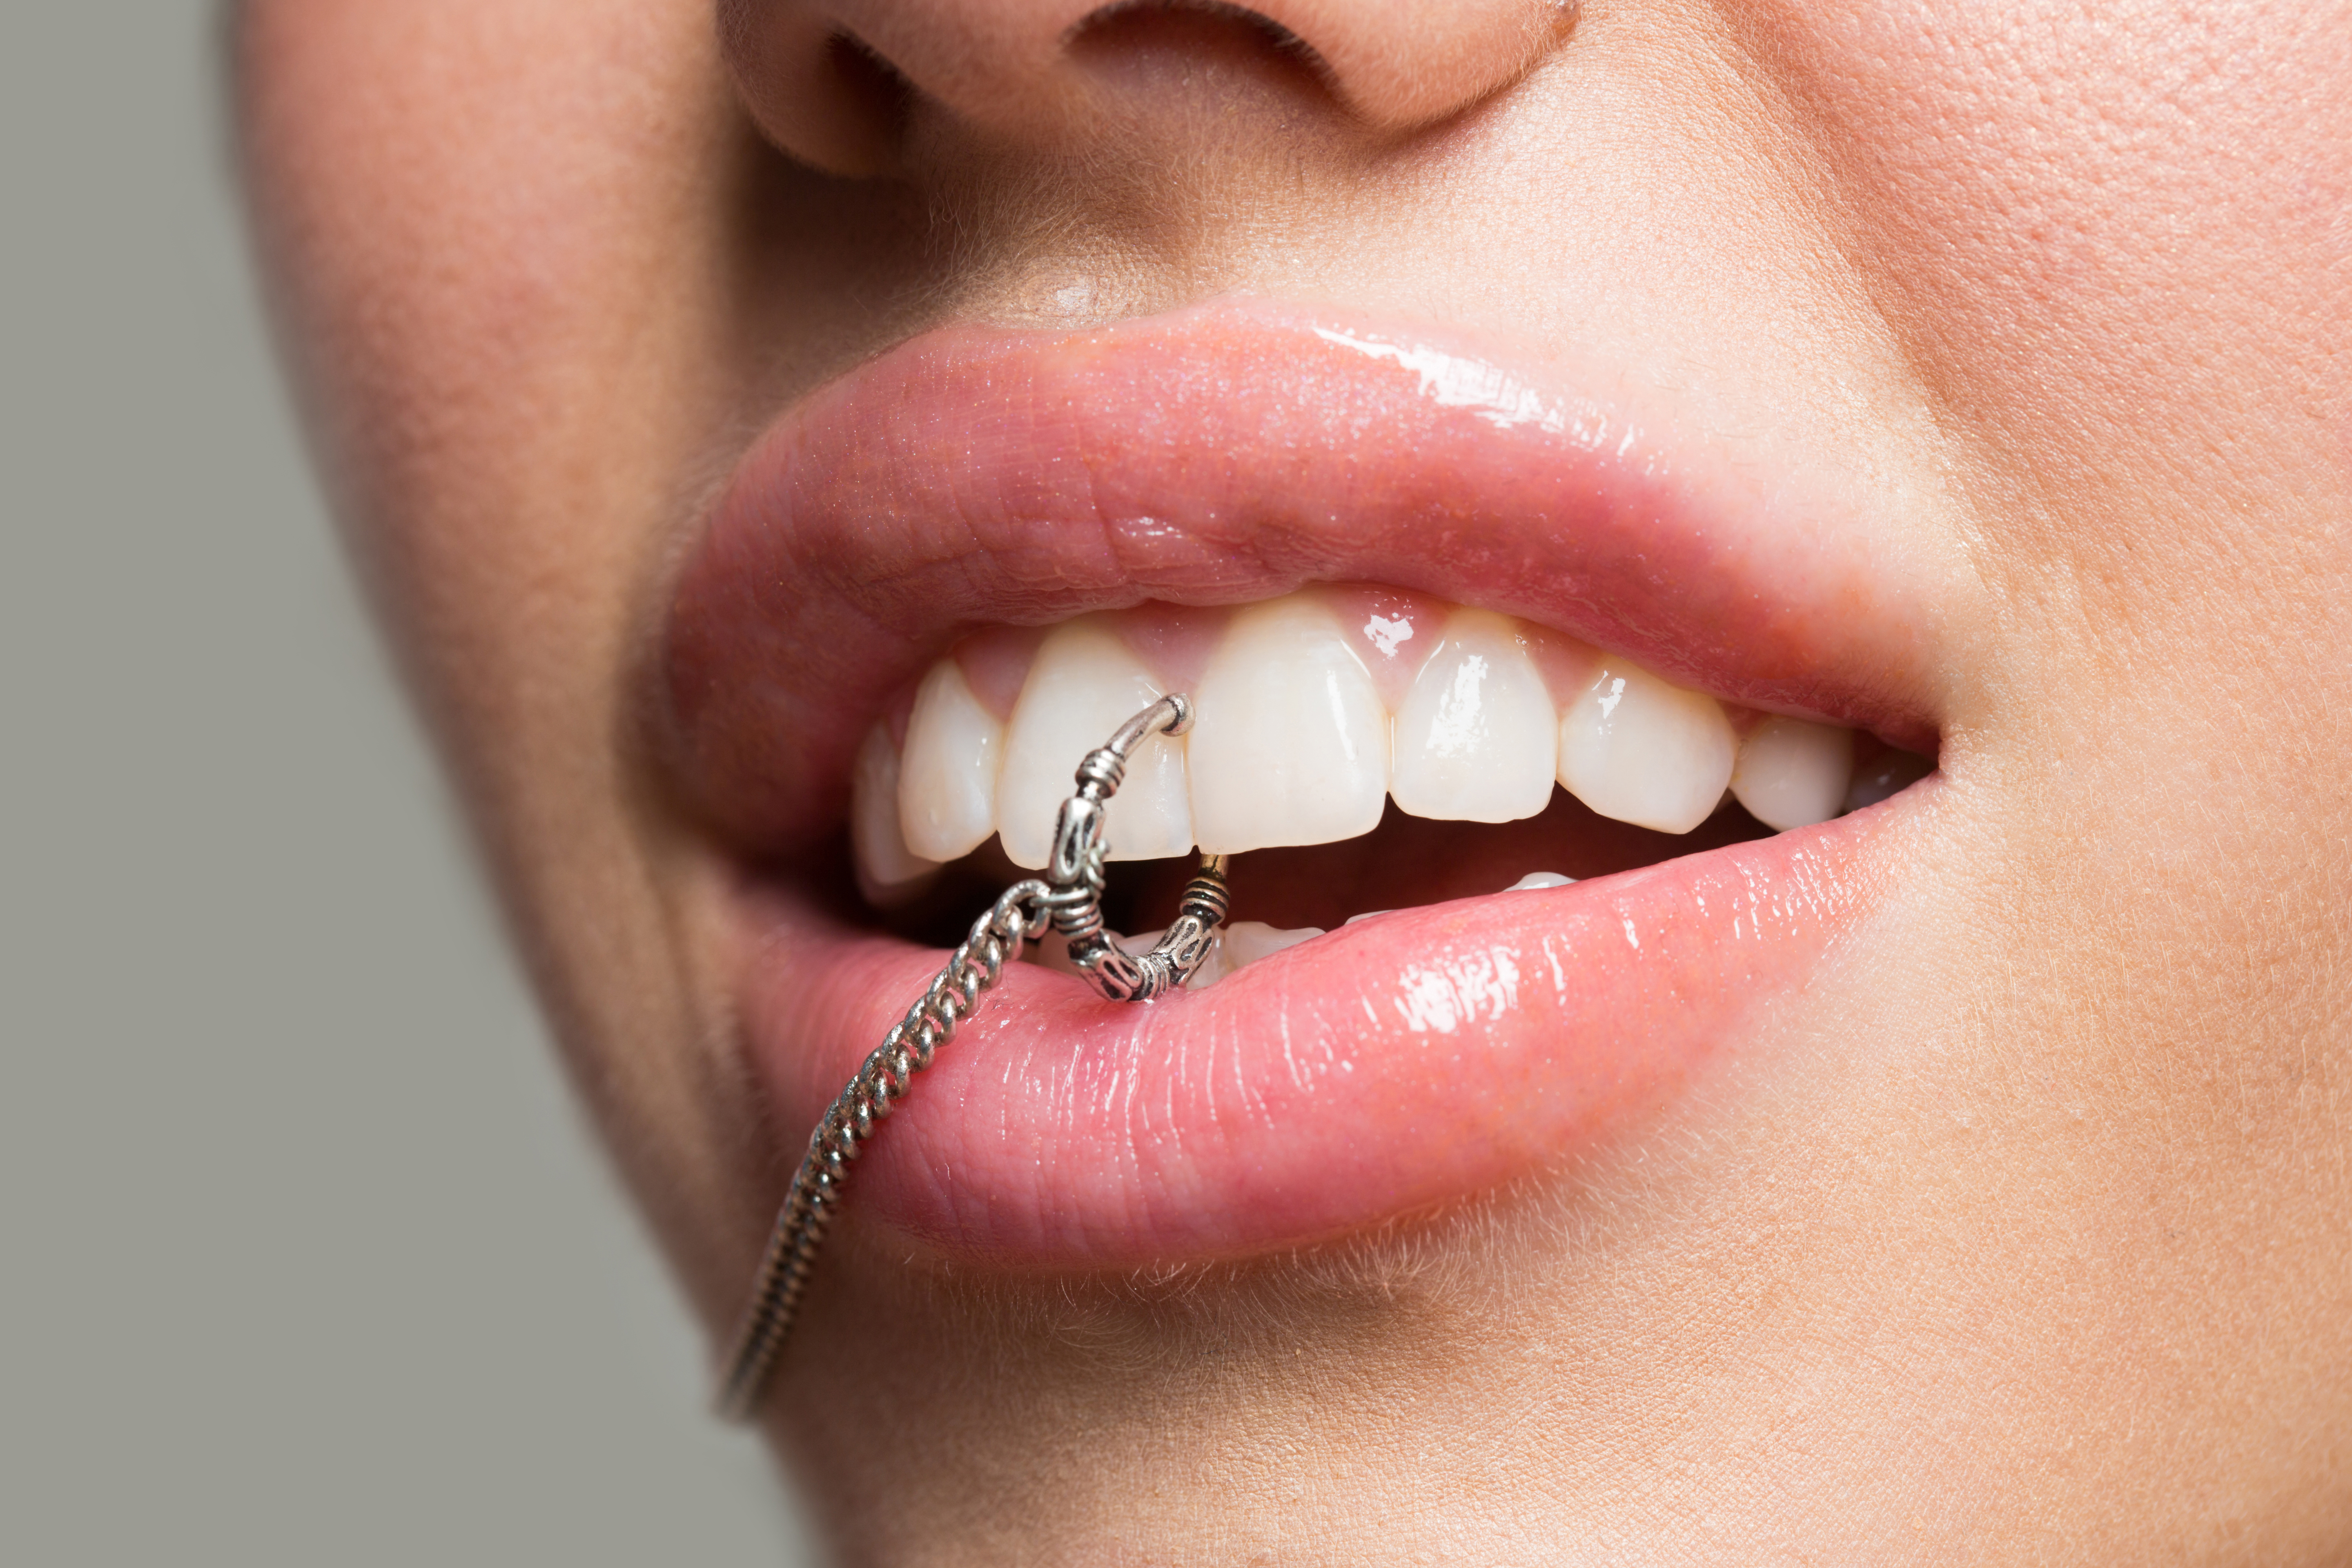 Dental implant health and oral piercings | Sanident